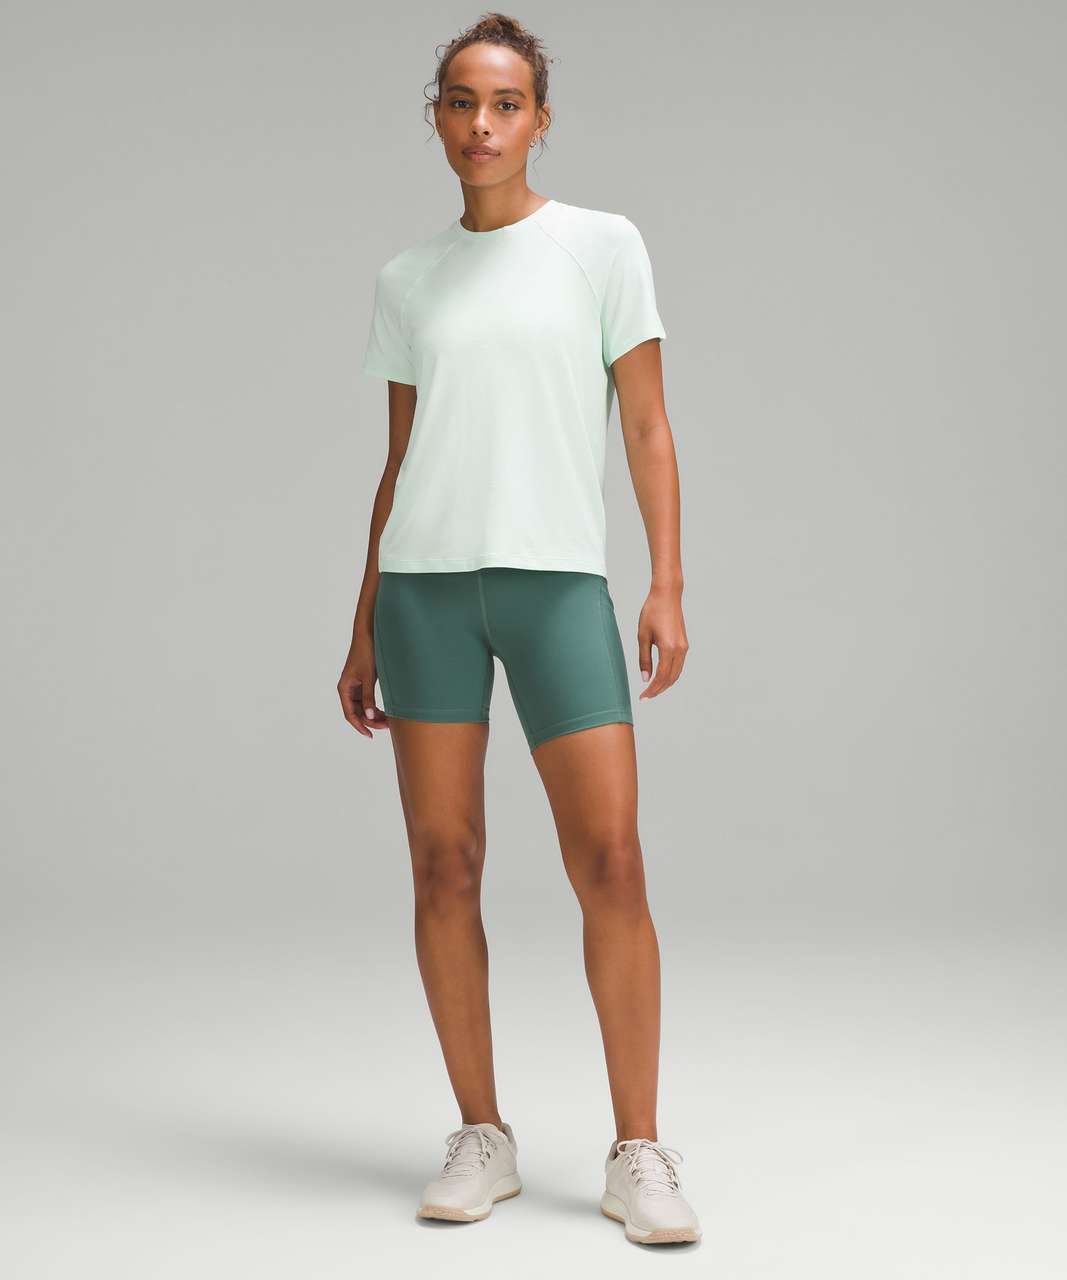 Lululemon License to Train Classic-Fit T-Shirt - Heathered Mint Moment